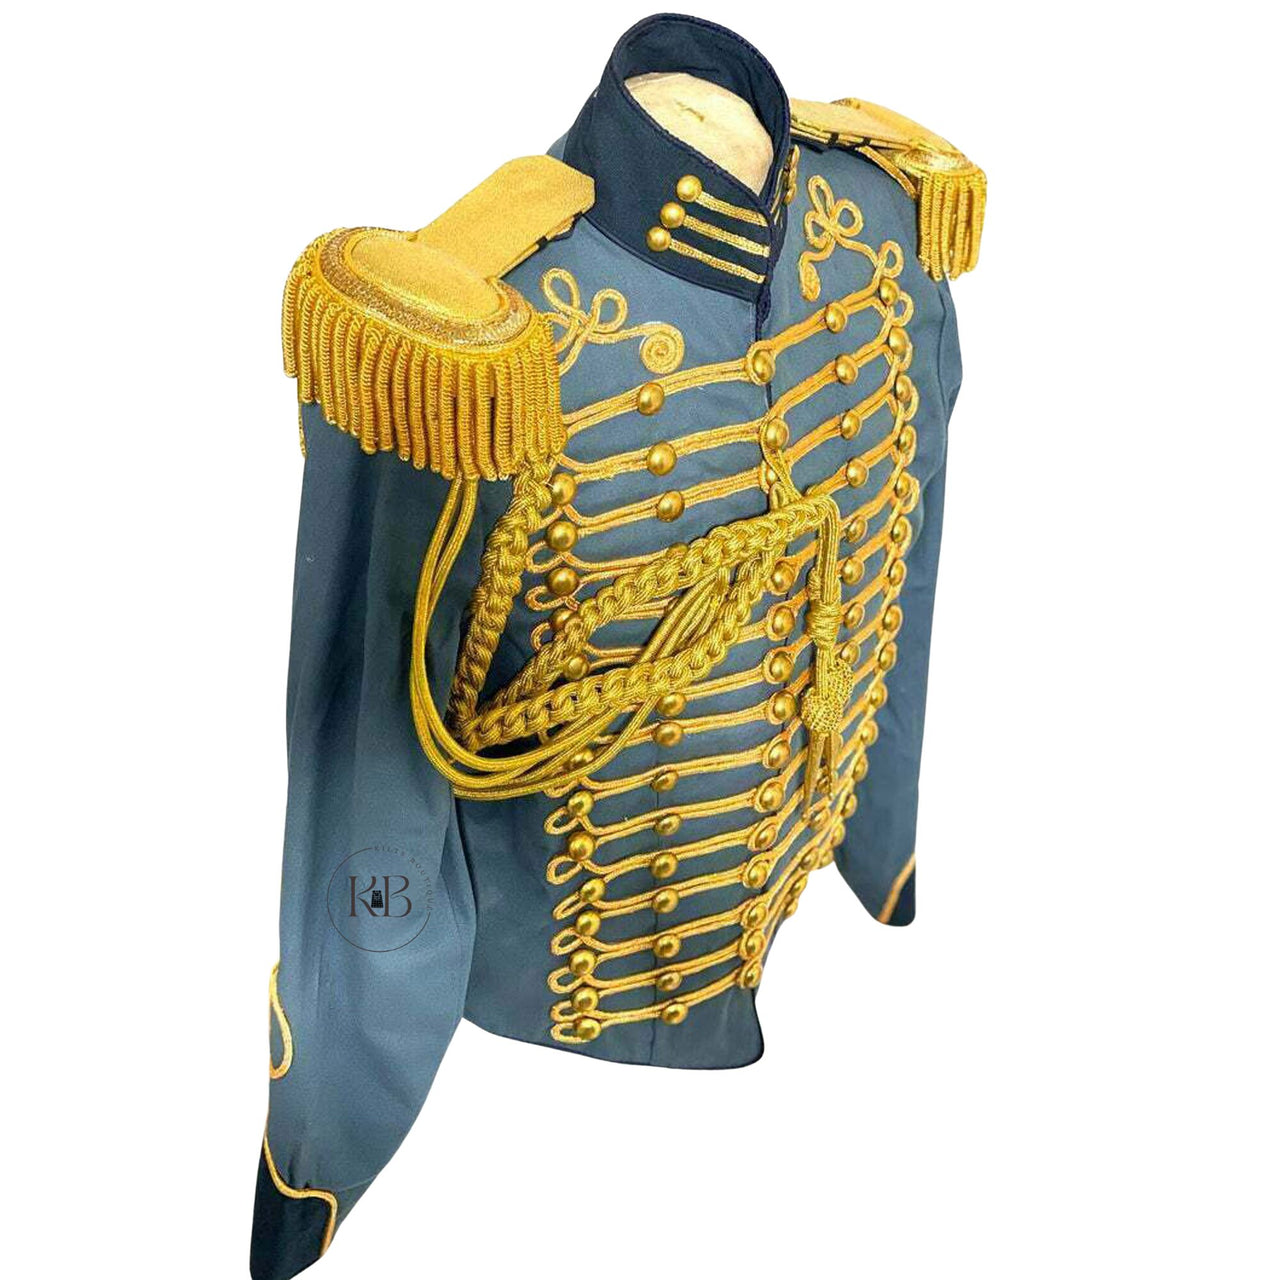 Historical American Civil War Gold Braiding Hussar Officers Jacket With Gold Aiguillette Costume